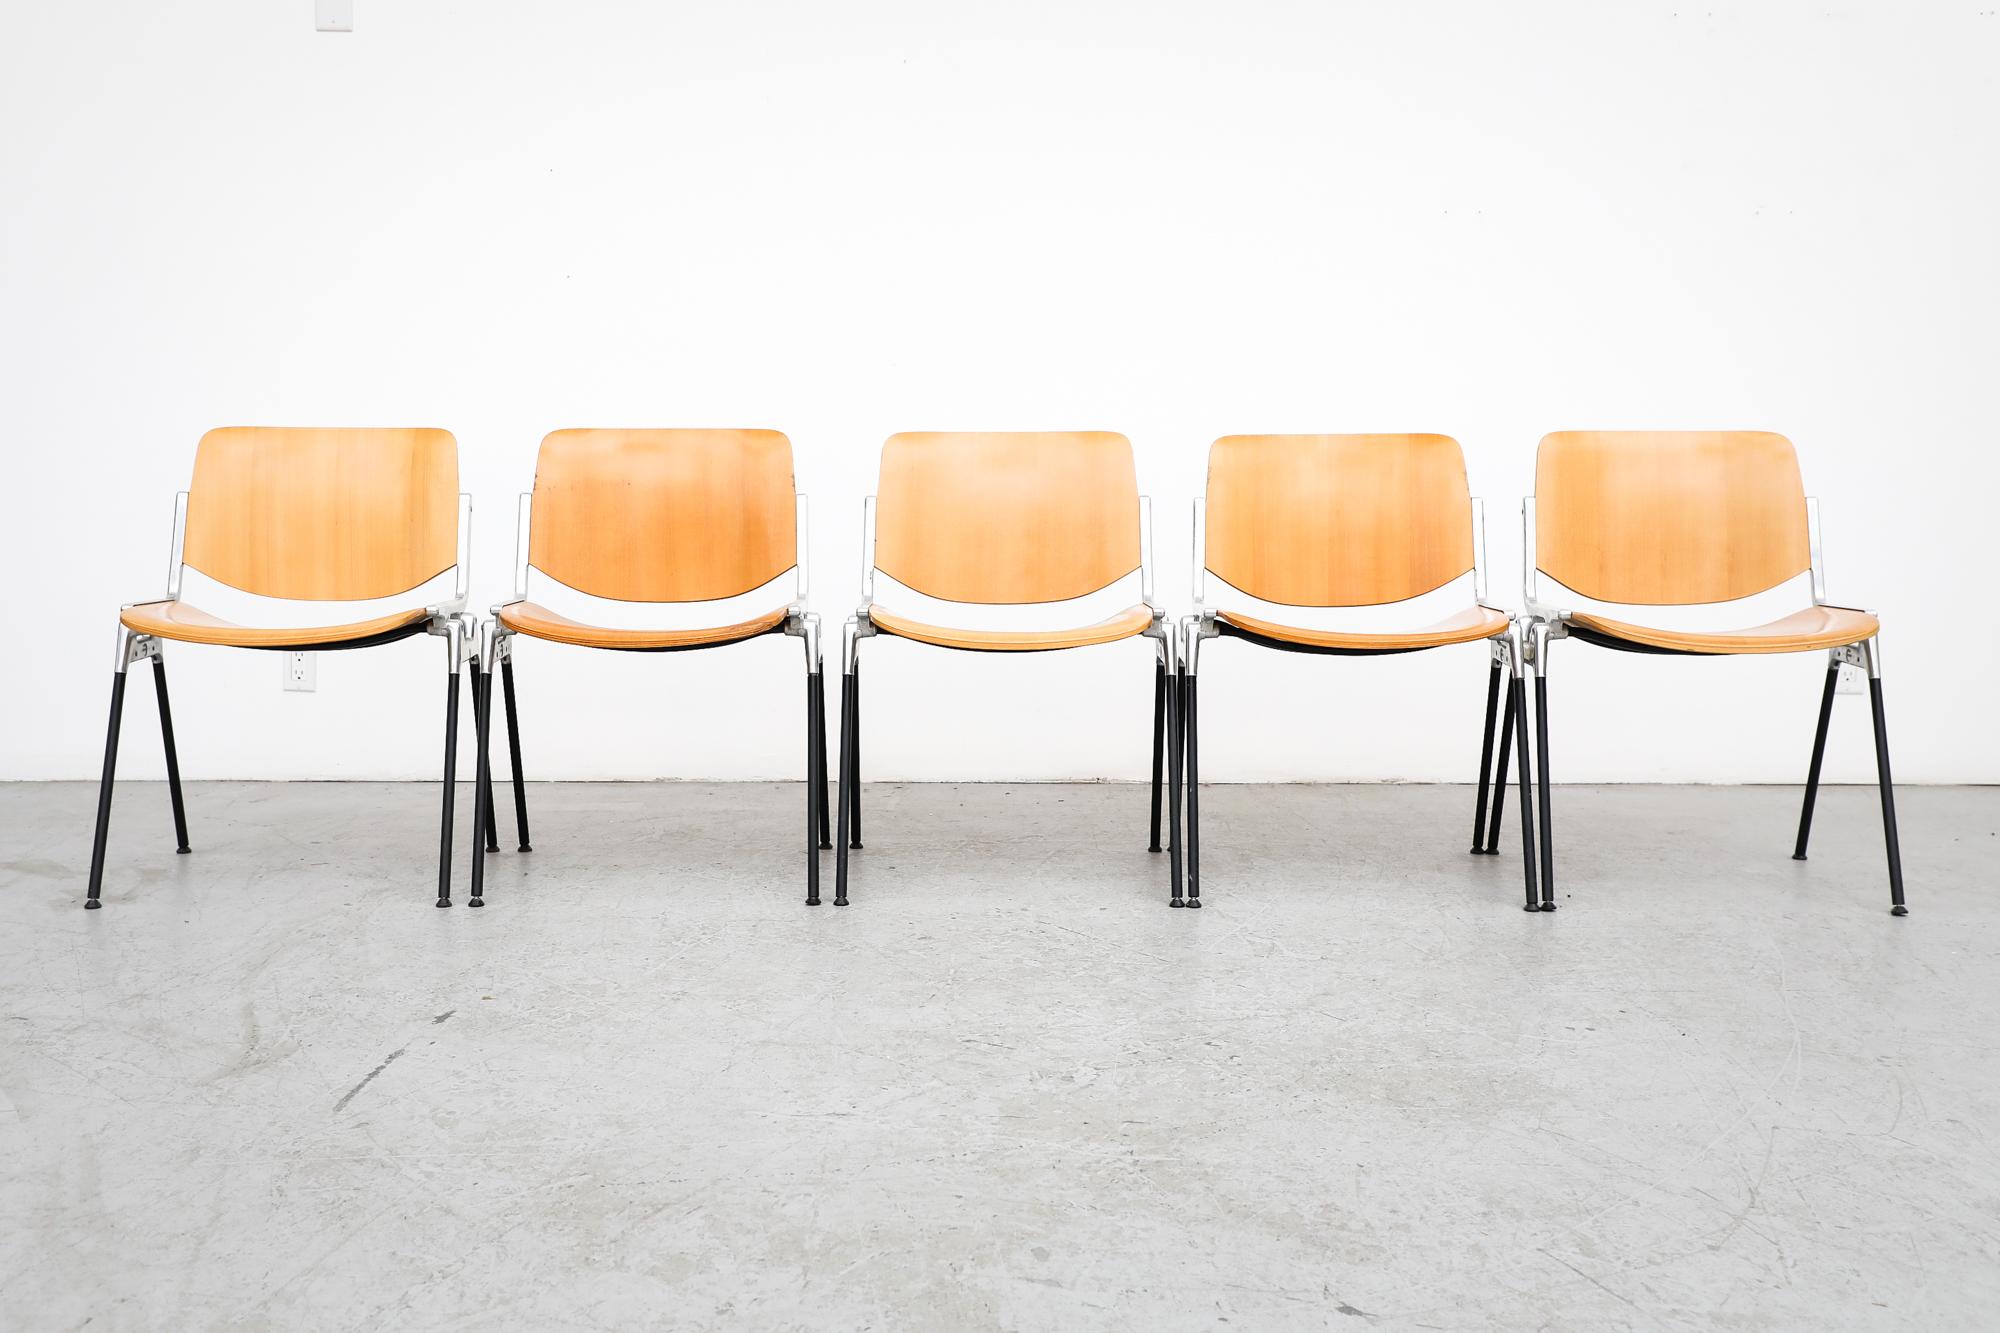 Light birch veneered Castelli chairs with cast aluminum frames and black sheathed legs and feet. Giancarlo Piretti's works are in several museums, including the MoMA in New York, and he has received numerous prizes. These are in original condition